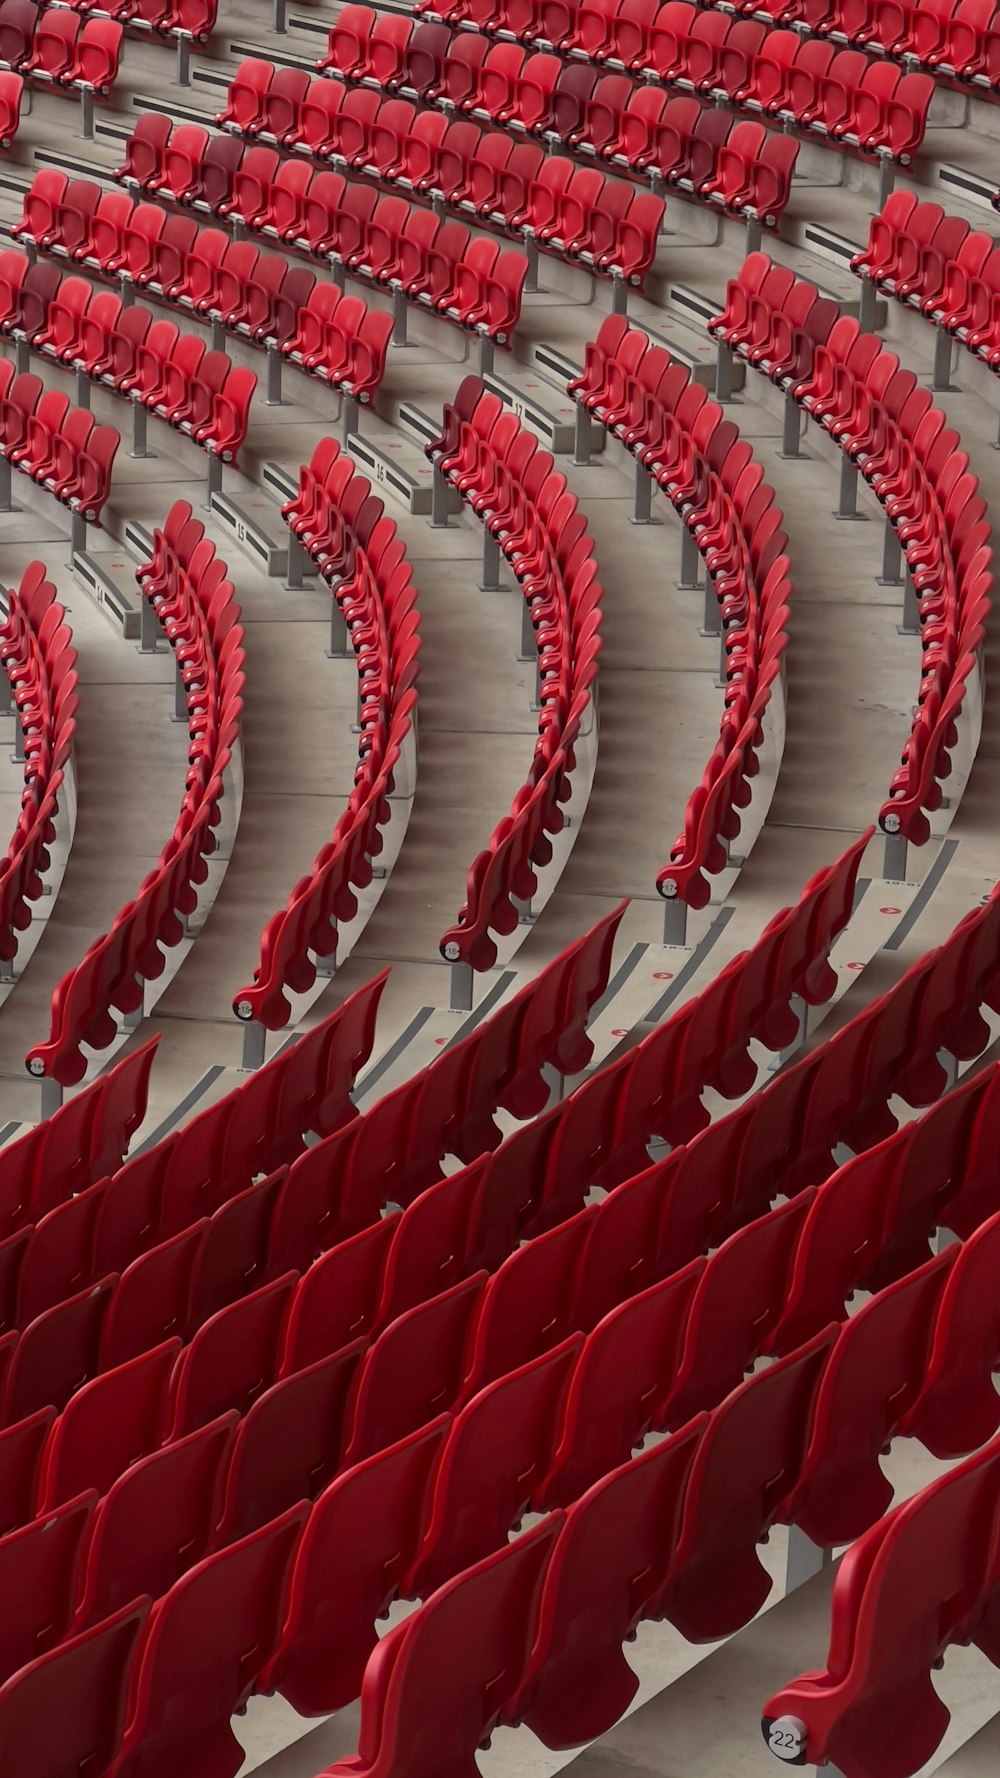 a row of red seats in a stadium